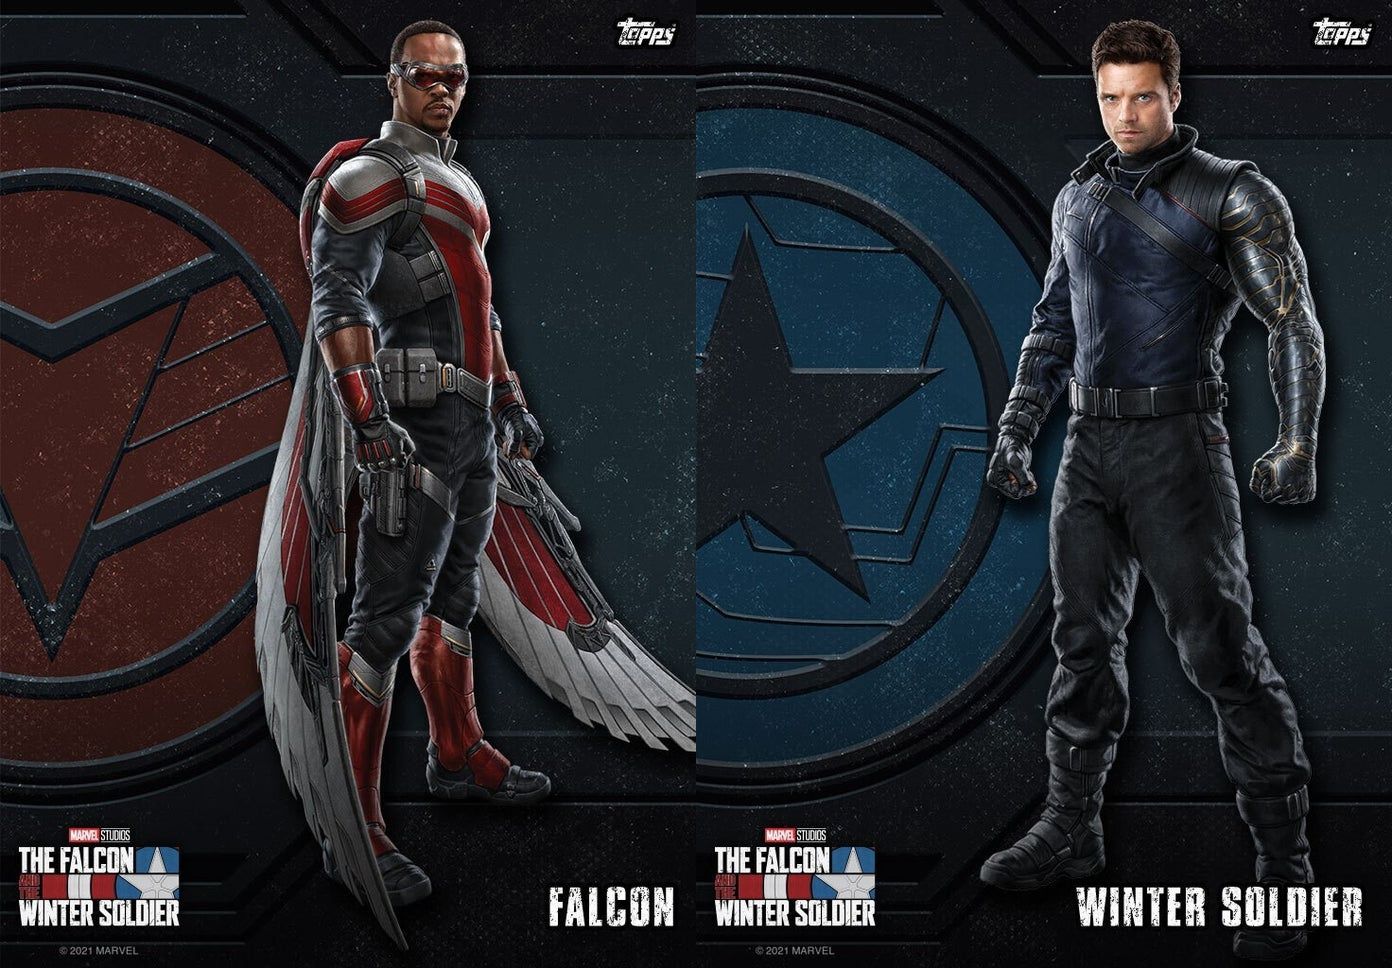 Topps trading cards reveal The Falcon and the Winter Soldier costumes